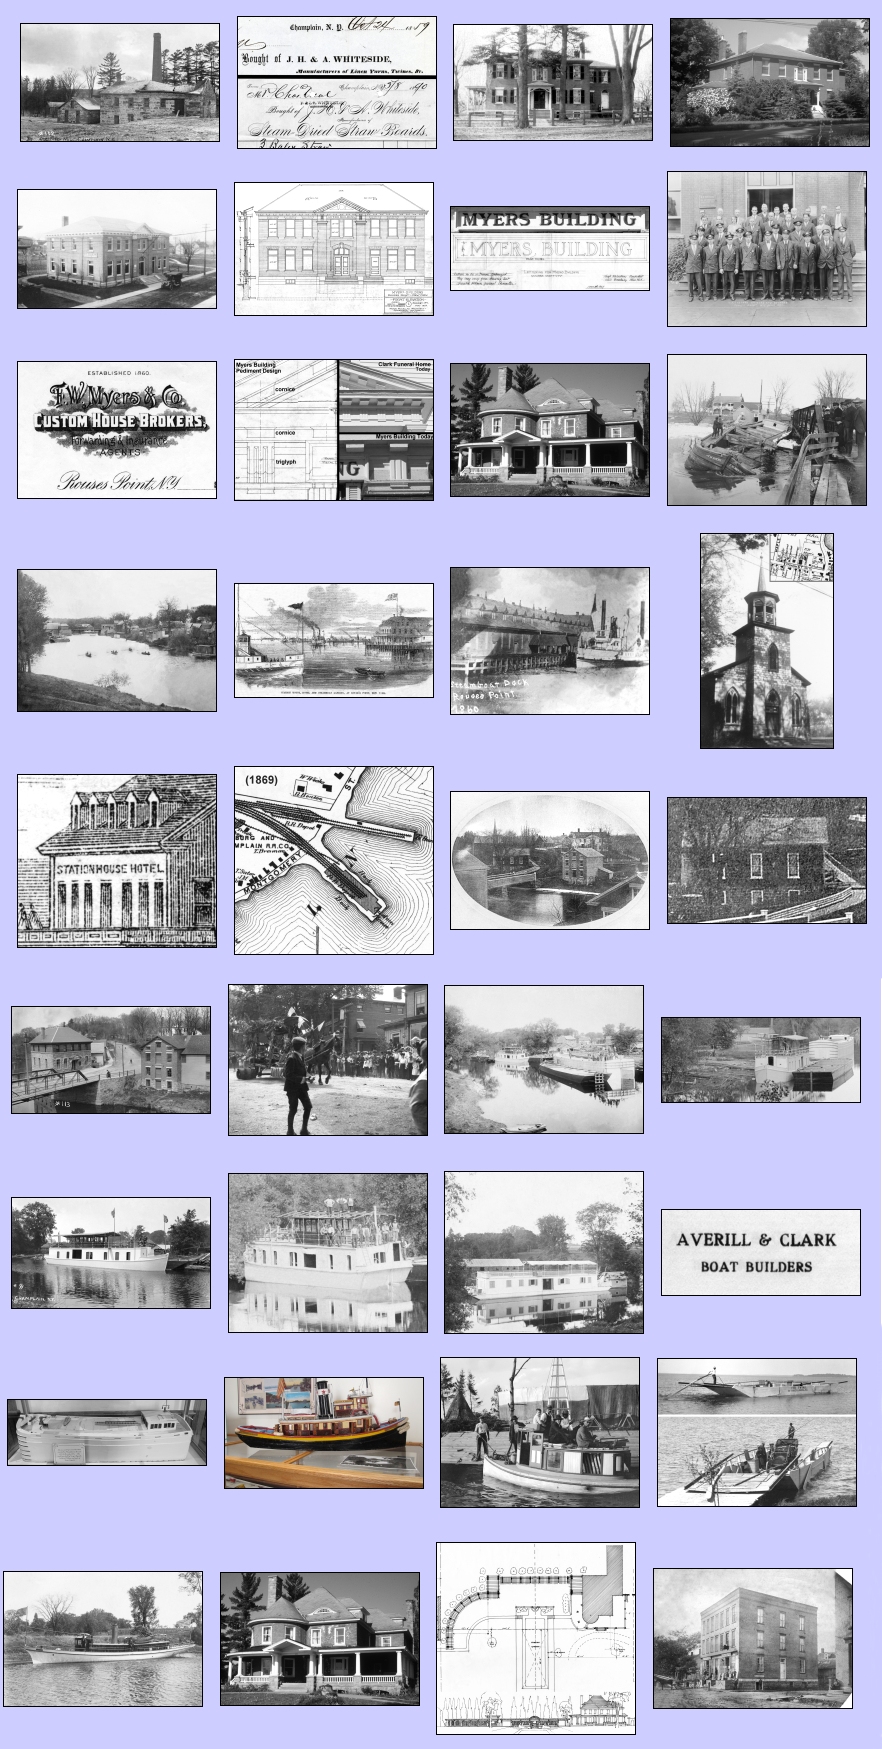 2012 champlain historic calendar images used
                      in months